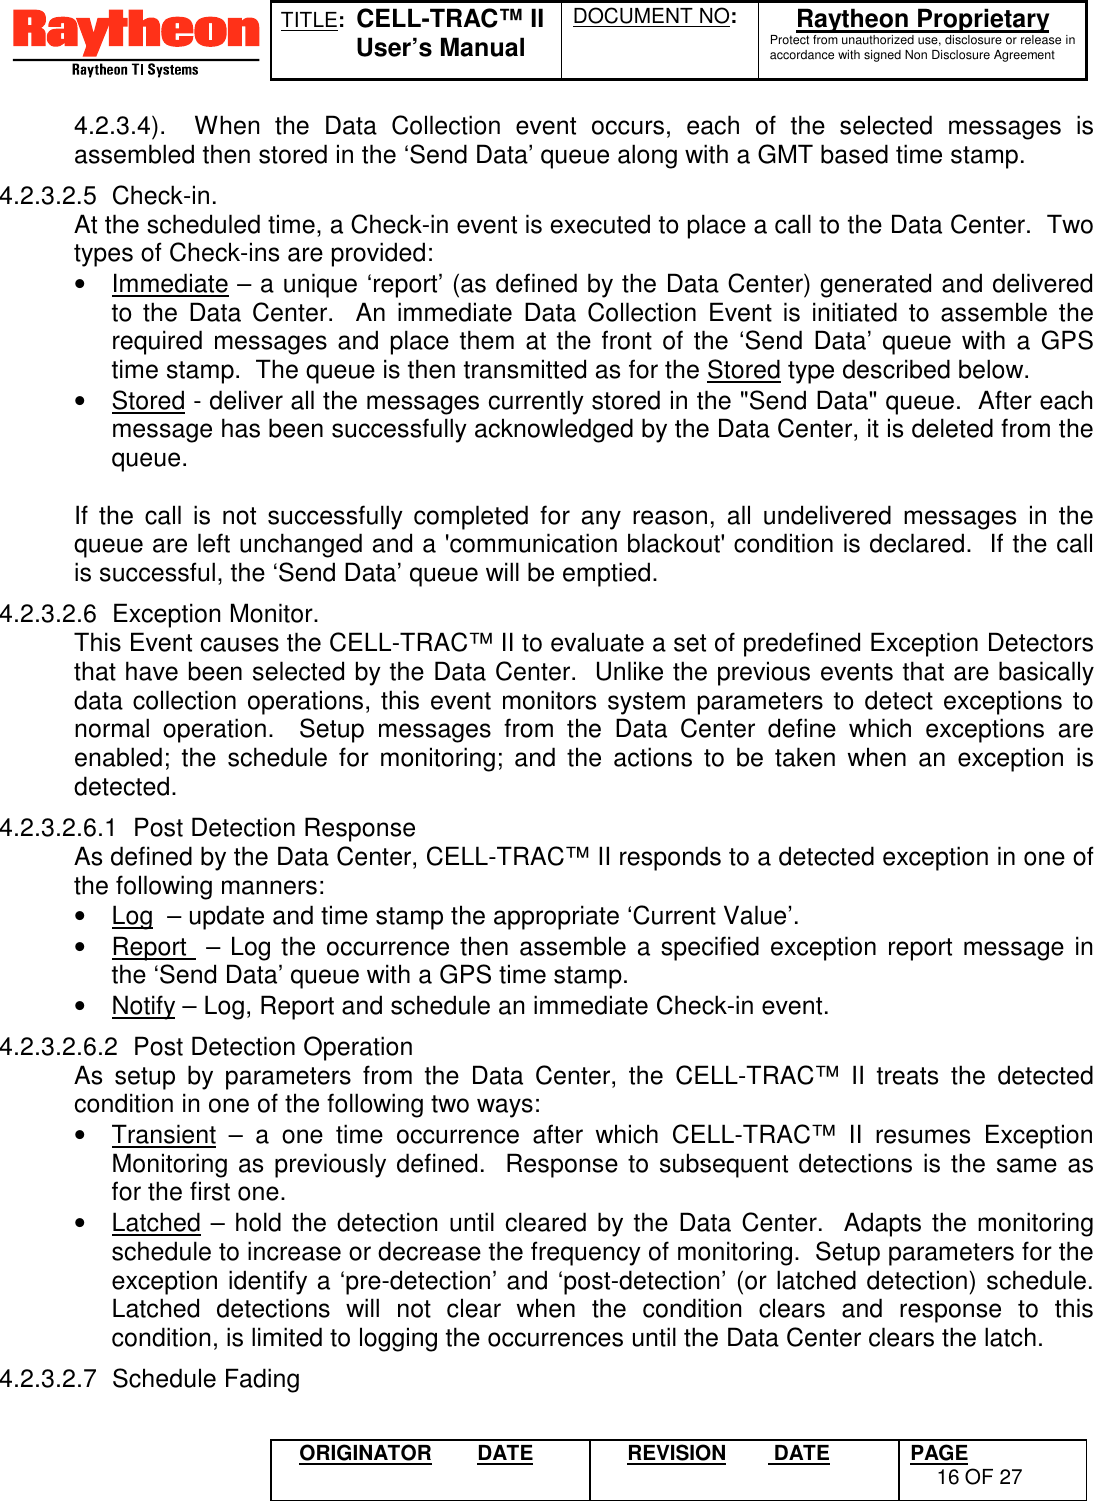 TITLE:  CELL-TRAC™ IIUser’s ManualDOCUMENT NO: Raytheon ProprietaryProtect from unauthorized use, disclosure or release inaccordance with signed Non Disclosure AgreementORIGINATOR DATE REVISION  DATE PAGE16 OF 274.2.3.4).  When the Data Collection event occurs, each of the selected messages isassembled then stored in the ‘Send Data’ queue along with a GMT based time stamp.4.2.3.2.5 Check-in.At the scheduled time, a Check-in event is executed to place a call to the Data Center.  Twotypes of Check-ins are provided:•  Immediate – a unique ‘report’ (as defined by the Data Center) generated and deliveredto the Data Center.  An immediate Data Collection Event is initiated to assemble therequired messages and place them at the front of the ‘Send Data’ queue with a GPStime stamp.  The queue is then transmitted as for the Stored type described below.•  Stored - deliver all the messages currently stored in the &quot;Send Data&quot; queue.  After eachmessage has been successfully acknowledged by the Data Center, it is deleted from thequeue.If the call is not successfully completed for any reason, all undelivered messages in thequeue are left unchanged and a &apos;communication blackout&apos; condition is declared.  If the callis successful, the ‘Send Data’ queue will be emptied.4.2.3.2.6 Exception Monitor.This Event causes the CELL-TRAC™ II to evaluate a set of predefined Exception Detectorsthat have been selected by the Data Center.  Unlike the previous events that are basicallydata collection operations, this event monitors system parameters to detect exceptions tonormal operation.  Setup messages from the Data Center define which exceptions areenabled; the schedule for monitoring; and the actions to be taken when an exception isdetected.4.2.3.2.6.1  Post Detection ResponseAs defined by the Data Center, CELL-TRAC™ II responds to a detected exception in one ofthe following manners:•  Log  – update and time stamp the appropriate ‘Current Value’.•  Report  – Log the occurrence then assemble a specified exception report message inthe ‘Send Data’ queue with a GPS time stamp.•  Notify – Log, Report and schedule an immediate Check-in event.4.2.3.2.6.2  Post Detection OperationAs setup by parameters from the Data Center, the CELL-TRAC™ II treats the detectedcondition in one of the following two ways:•  Transient – a one time occurrence after which CELL-TRAC™ II resumes ExceptionMonitoring as previously defined.  Response to subsequent detections is the same asfor the first one.•  Latched – hold the detection until cleared by the Data Center.  Adapts the monitoringschedule to increase or decrease the frequency of monitoring.  Setup parameters for theexception identify a ‘pre-detection’ and ‘post-detection’ (or latched detection) schedule.Latched detections will not clear when the condition clears and response to thiscondition, is limited to logging the occurrences until the Data Center clears the latch.4.2.3.2.7 Schedule Fading